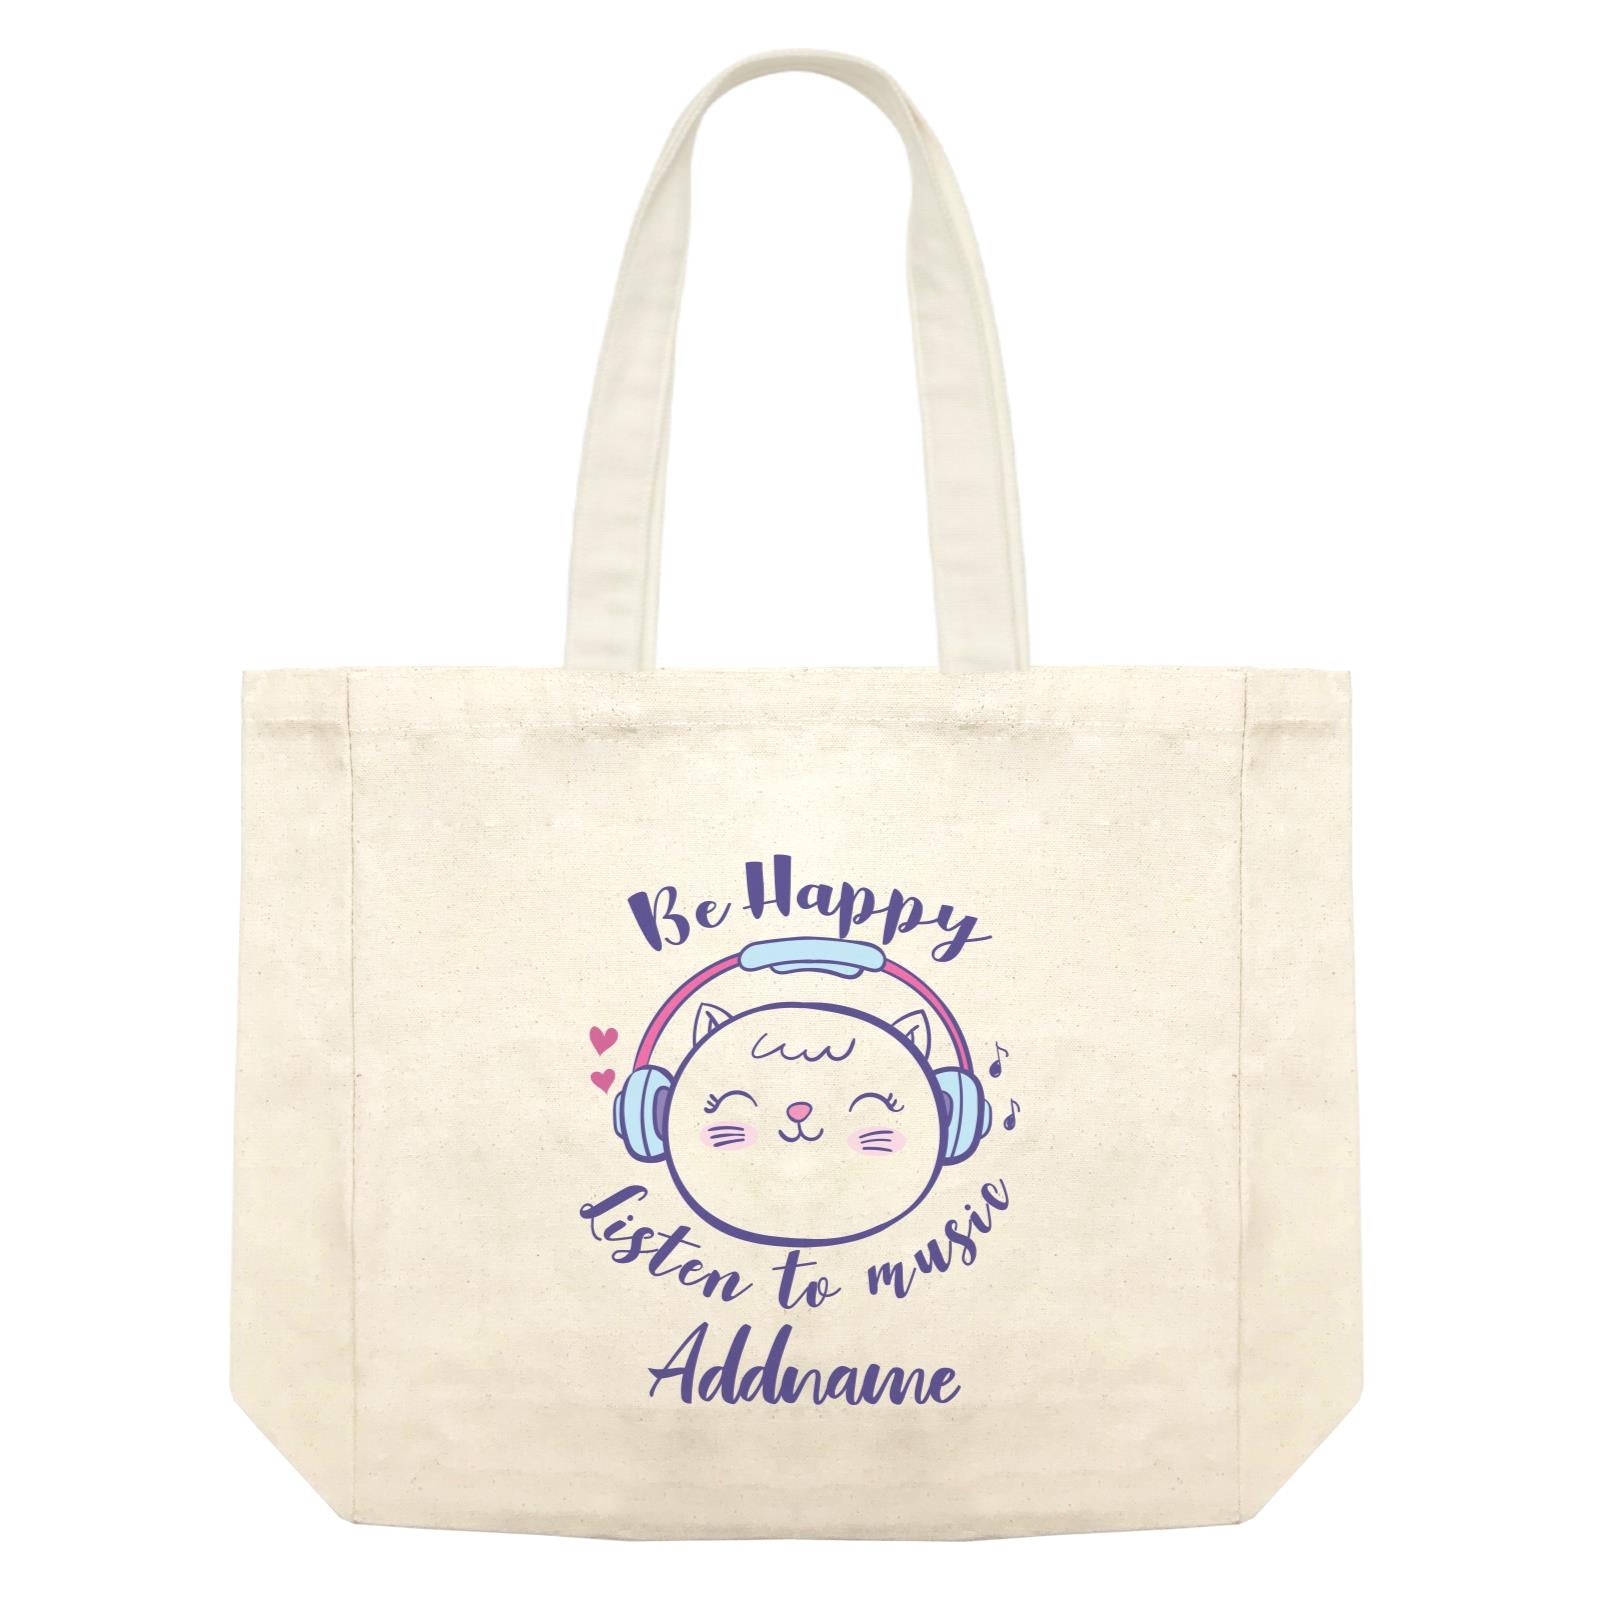 Cool Cute Animals Cats Be Happy Listen To Music Addname Shopping Bag